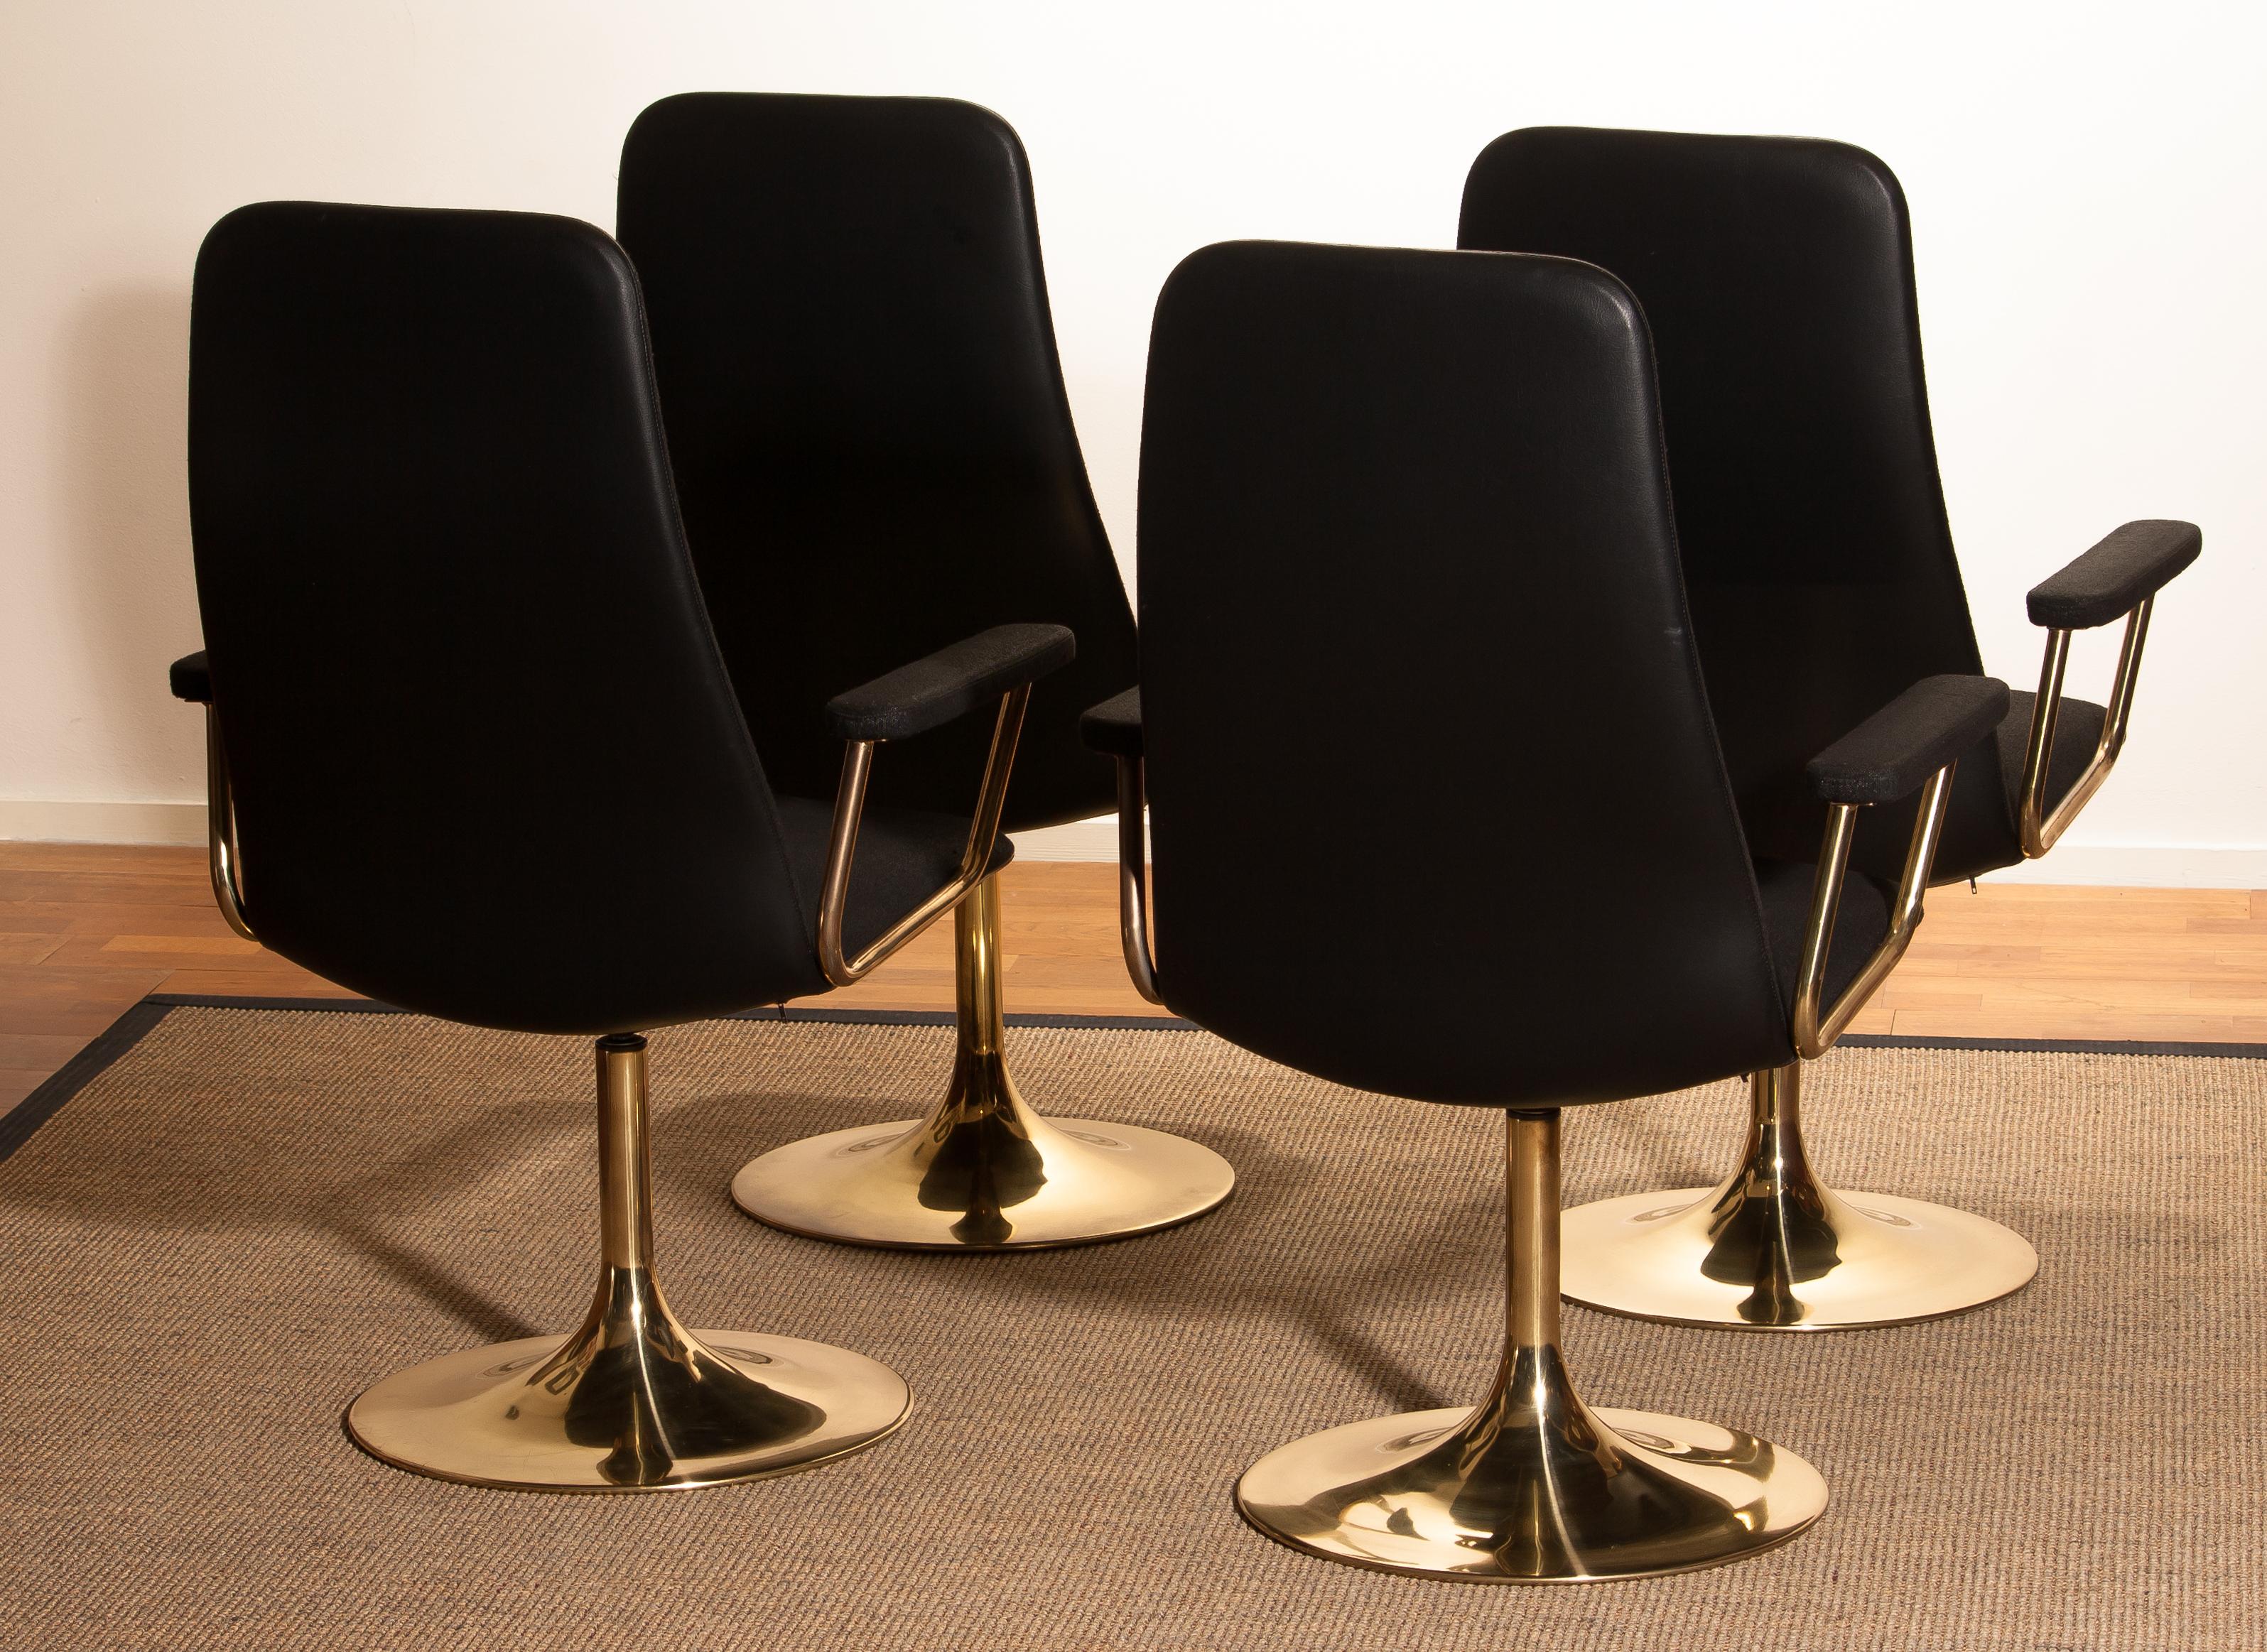 Four Golden, with Black Fabric, Armrest Swivel Chairs by Johanson Design, 1970 5